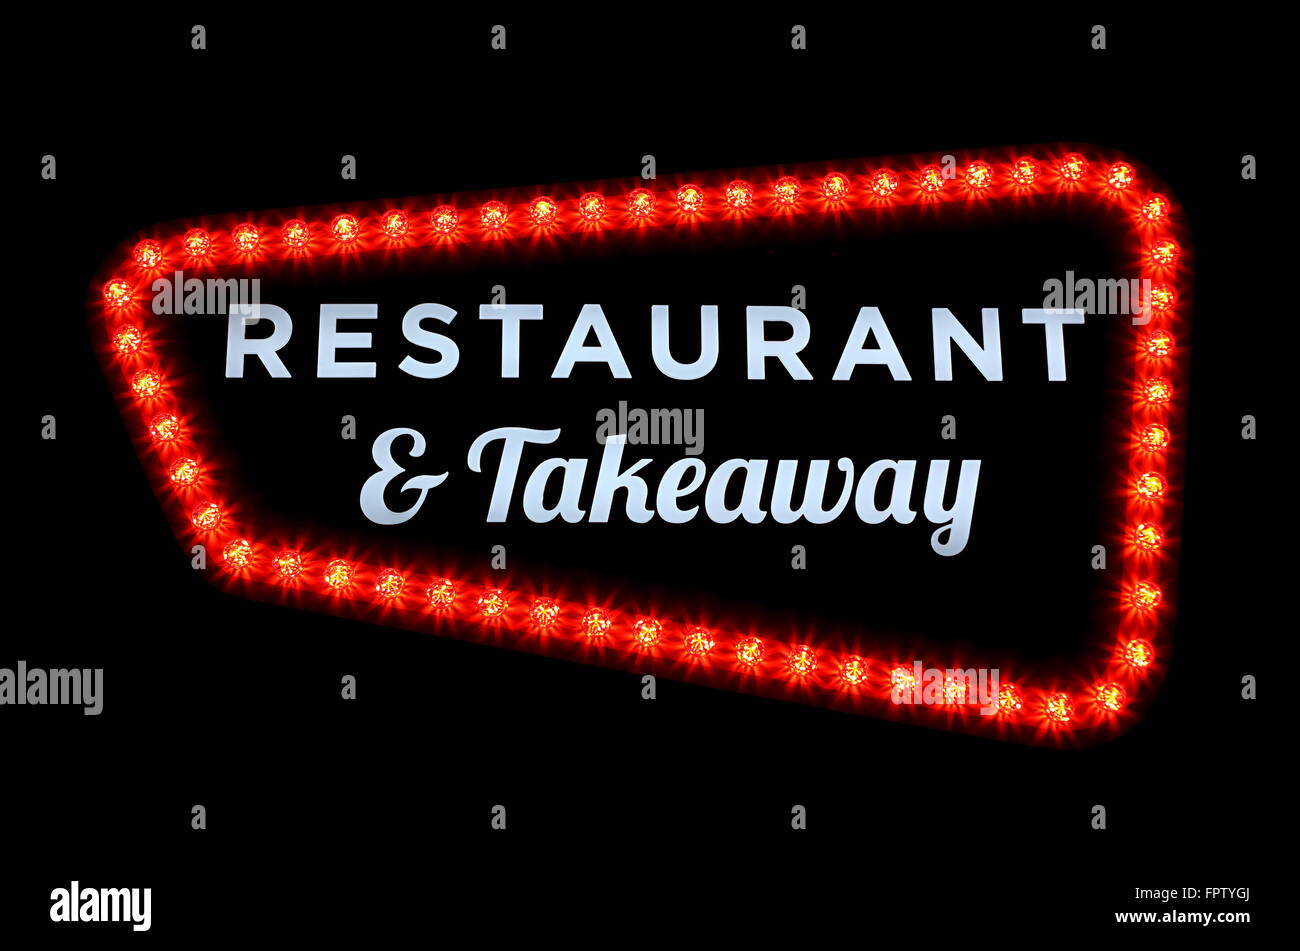 Restaurant and take away neon sign with red bulbs on black background Stock Photo